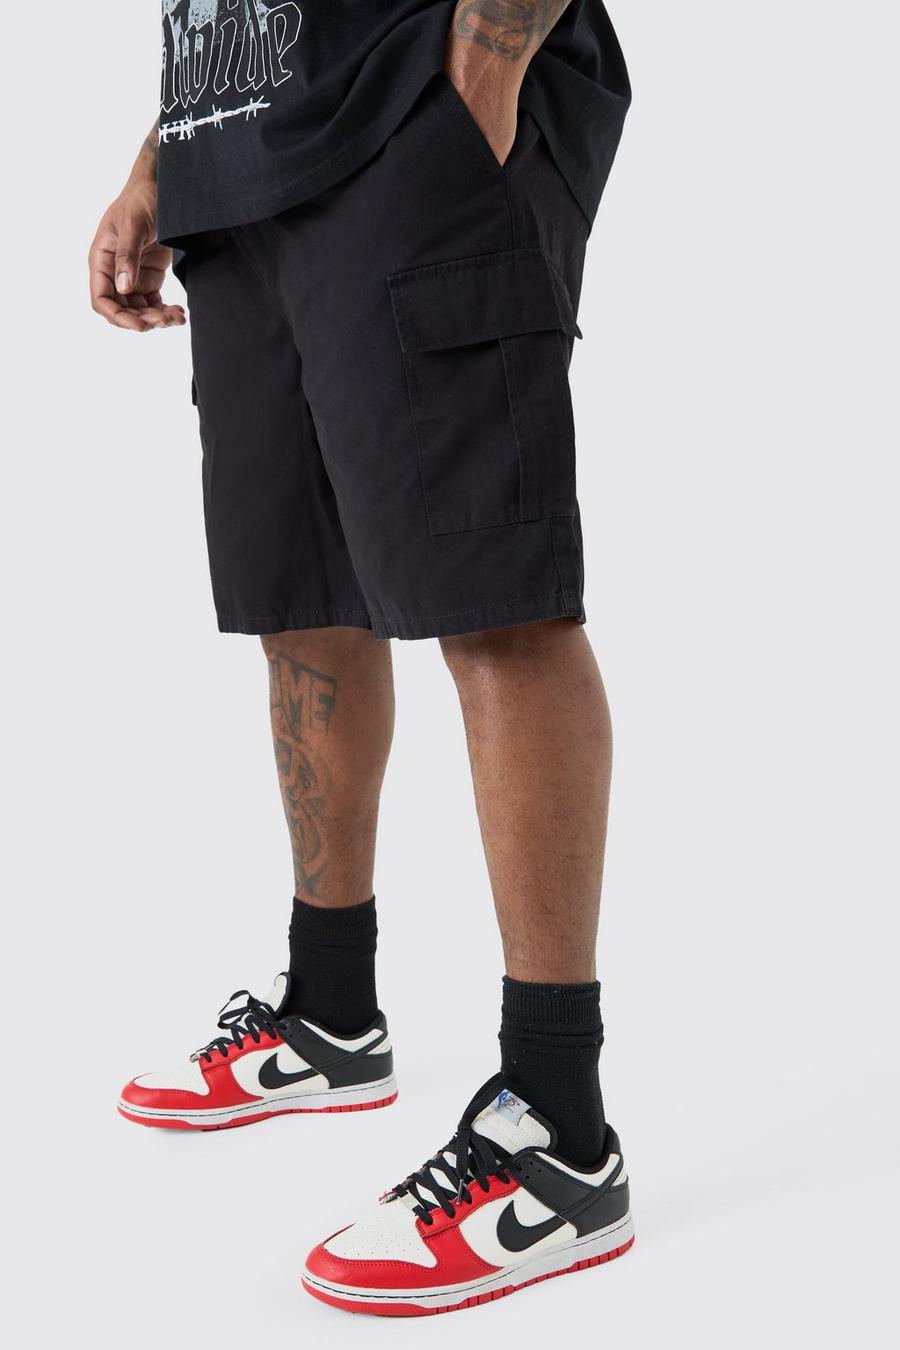 Plus Elastic Waist Relaxed Fit Cargo Shorts these In Black